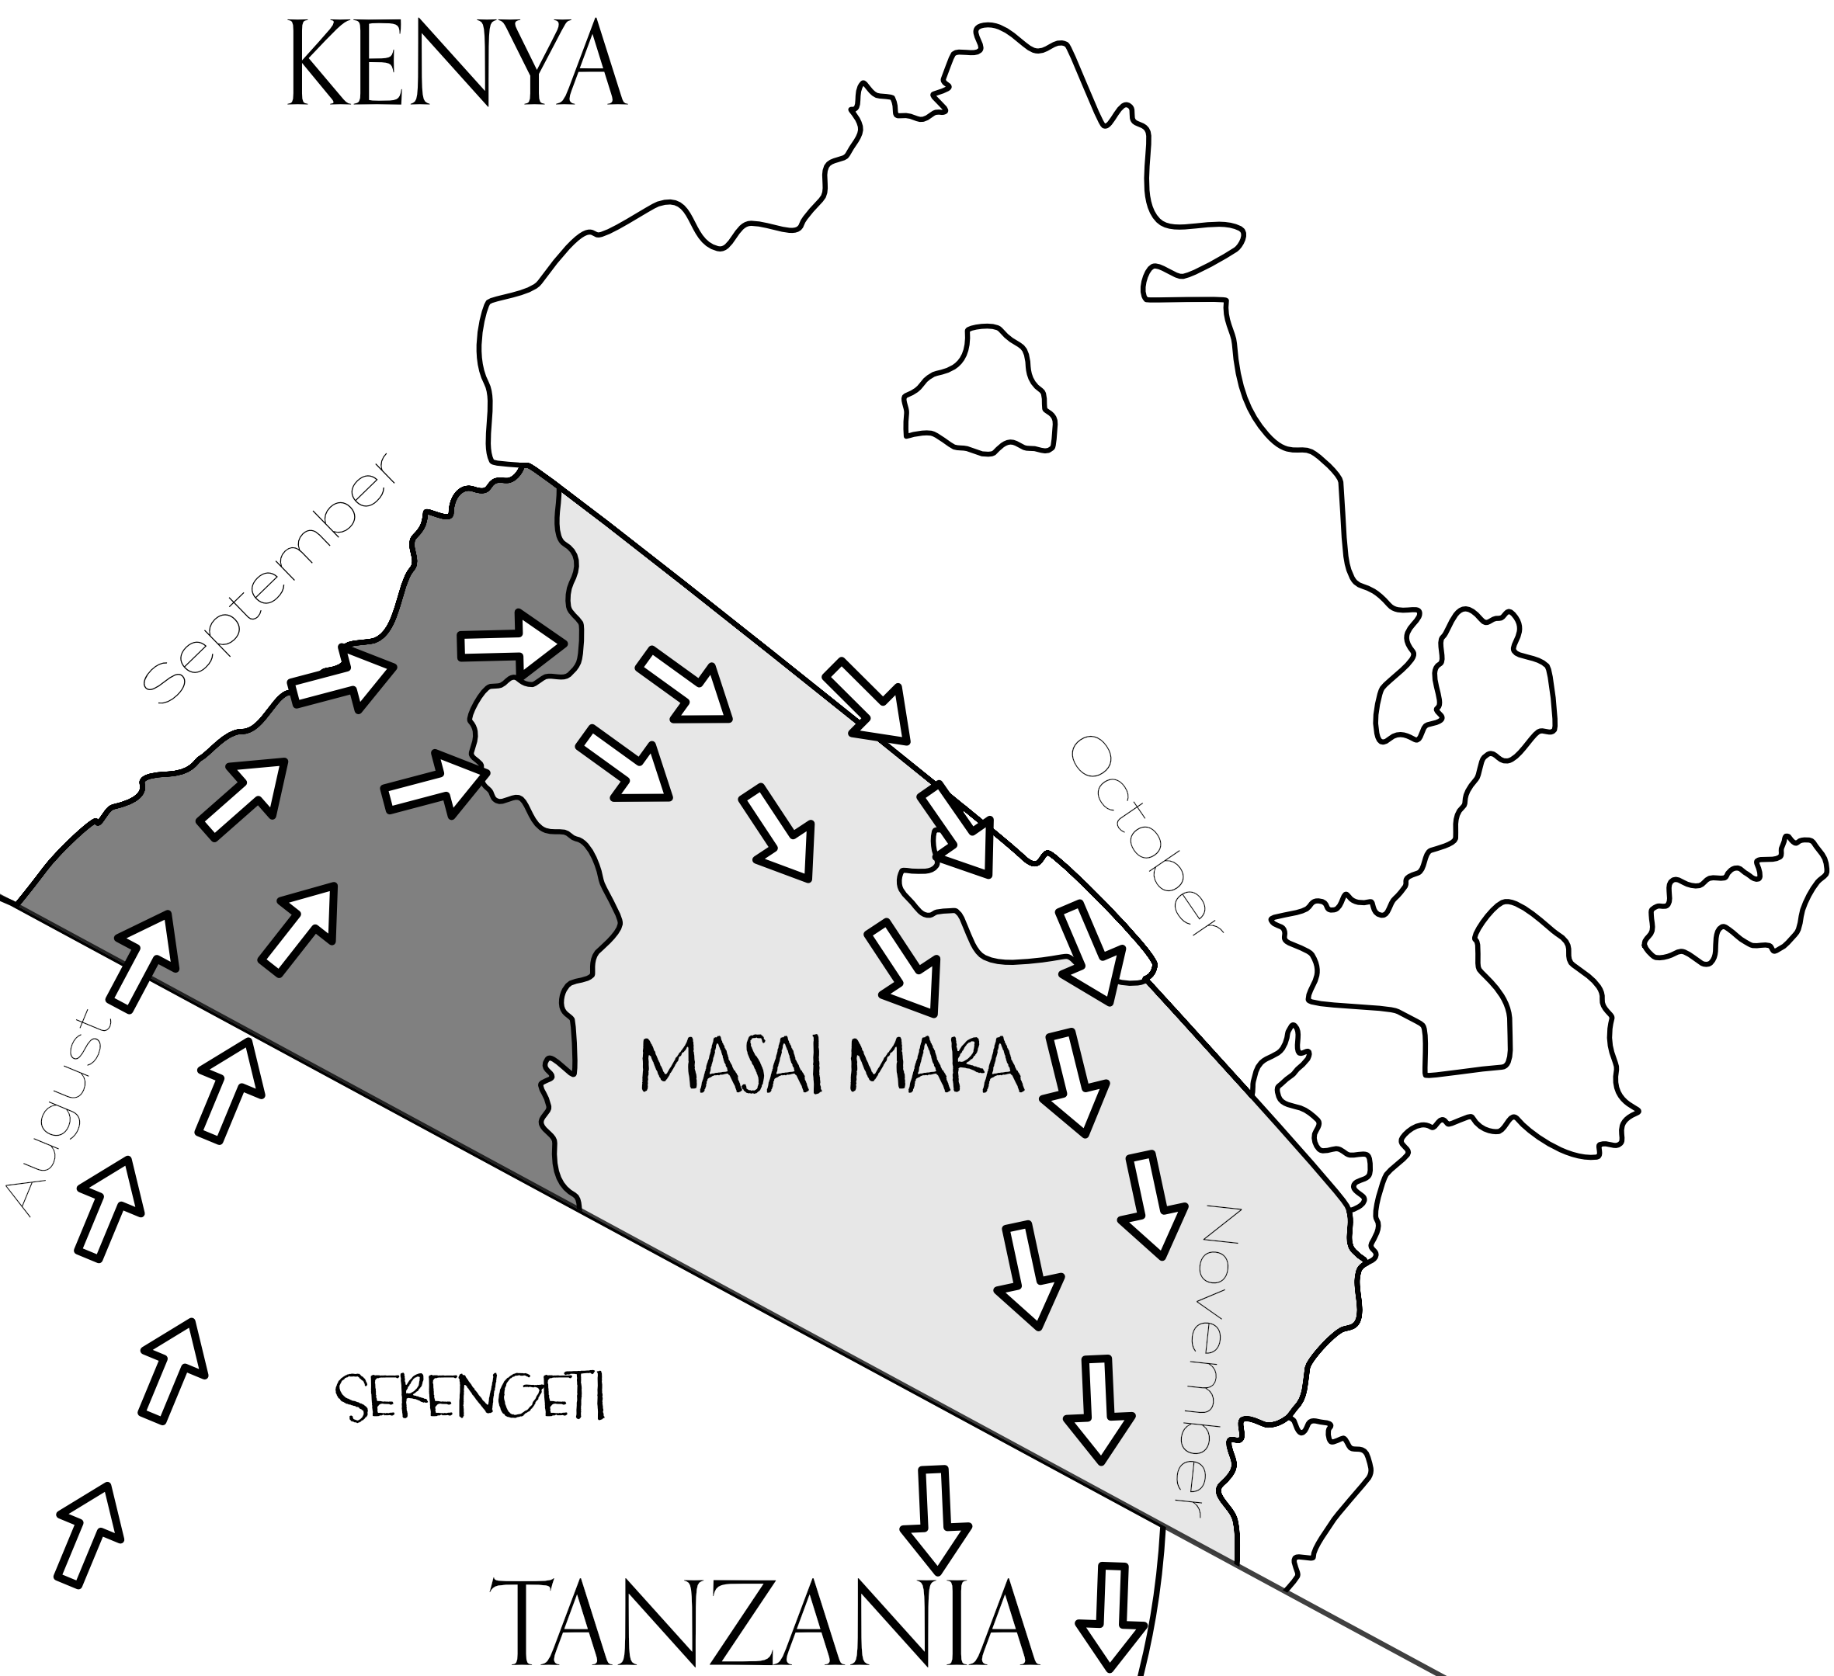 Map of the Masai Mara displaying the timeline of the great migration across the natural reserve